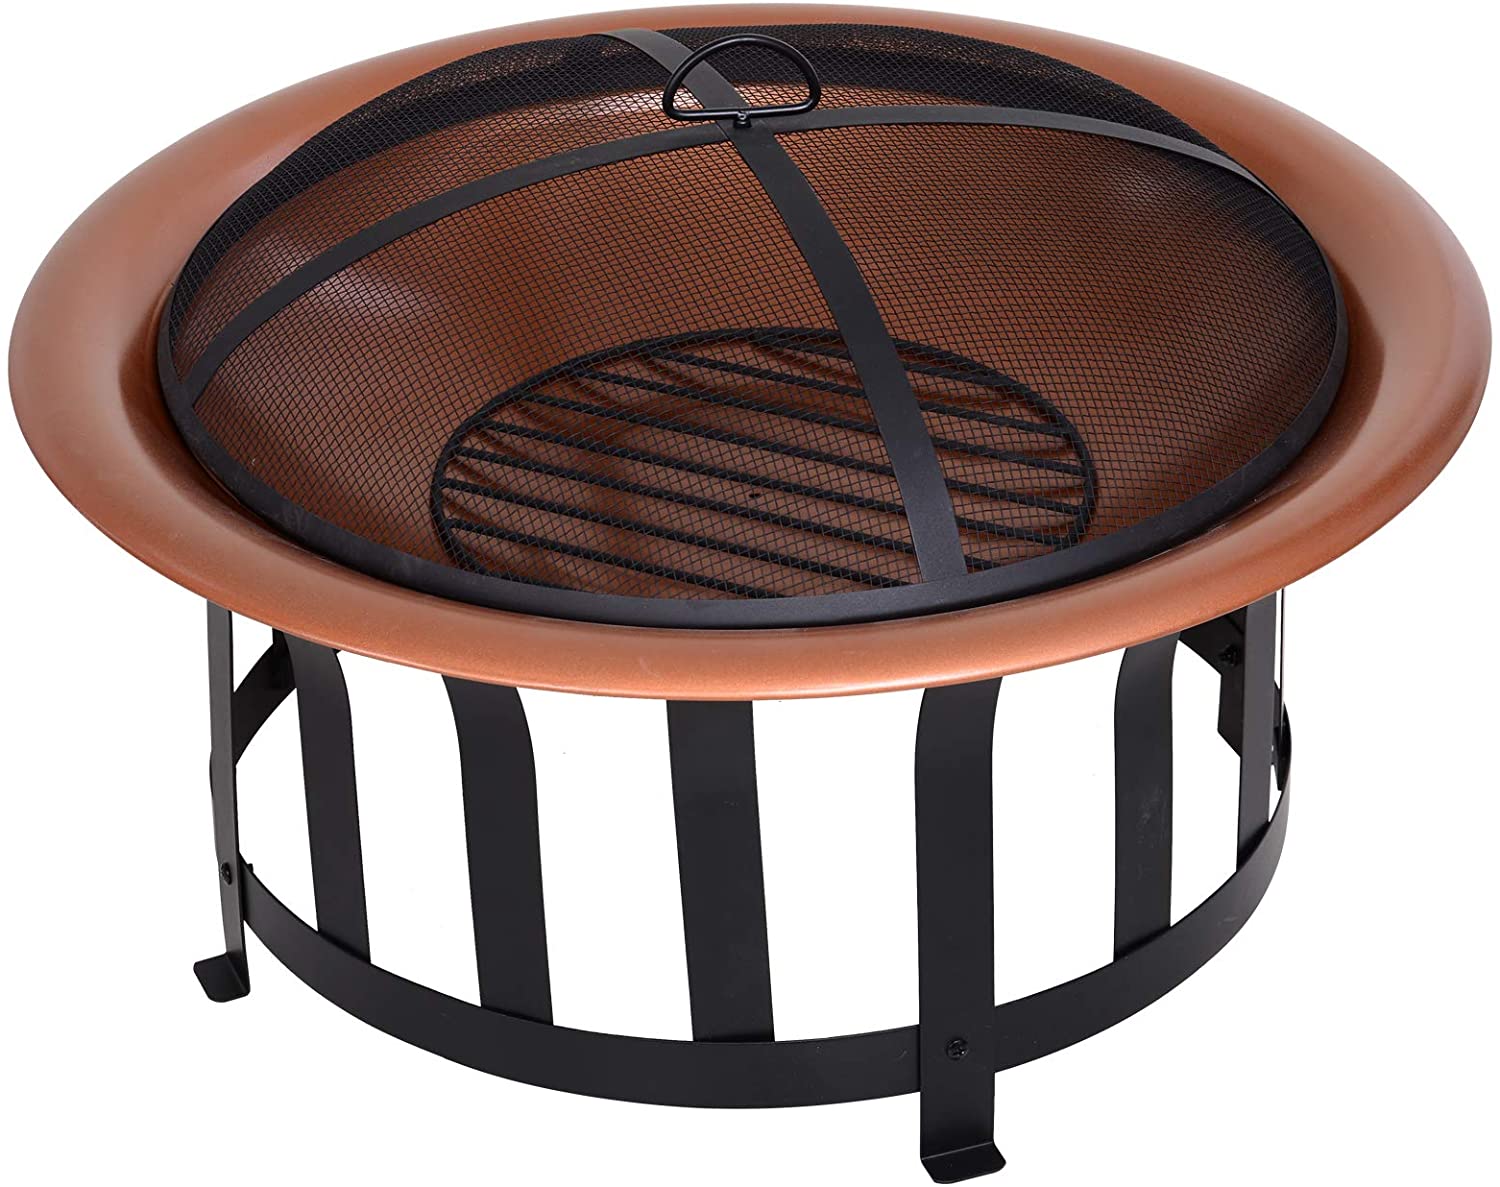 Outsunny Copper-Colored Round Metal Fire Pit